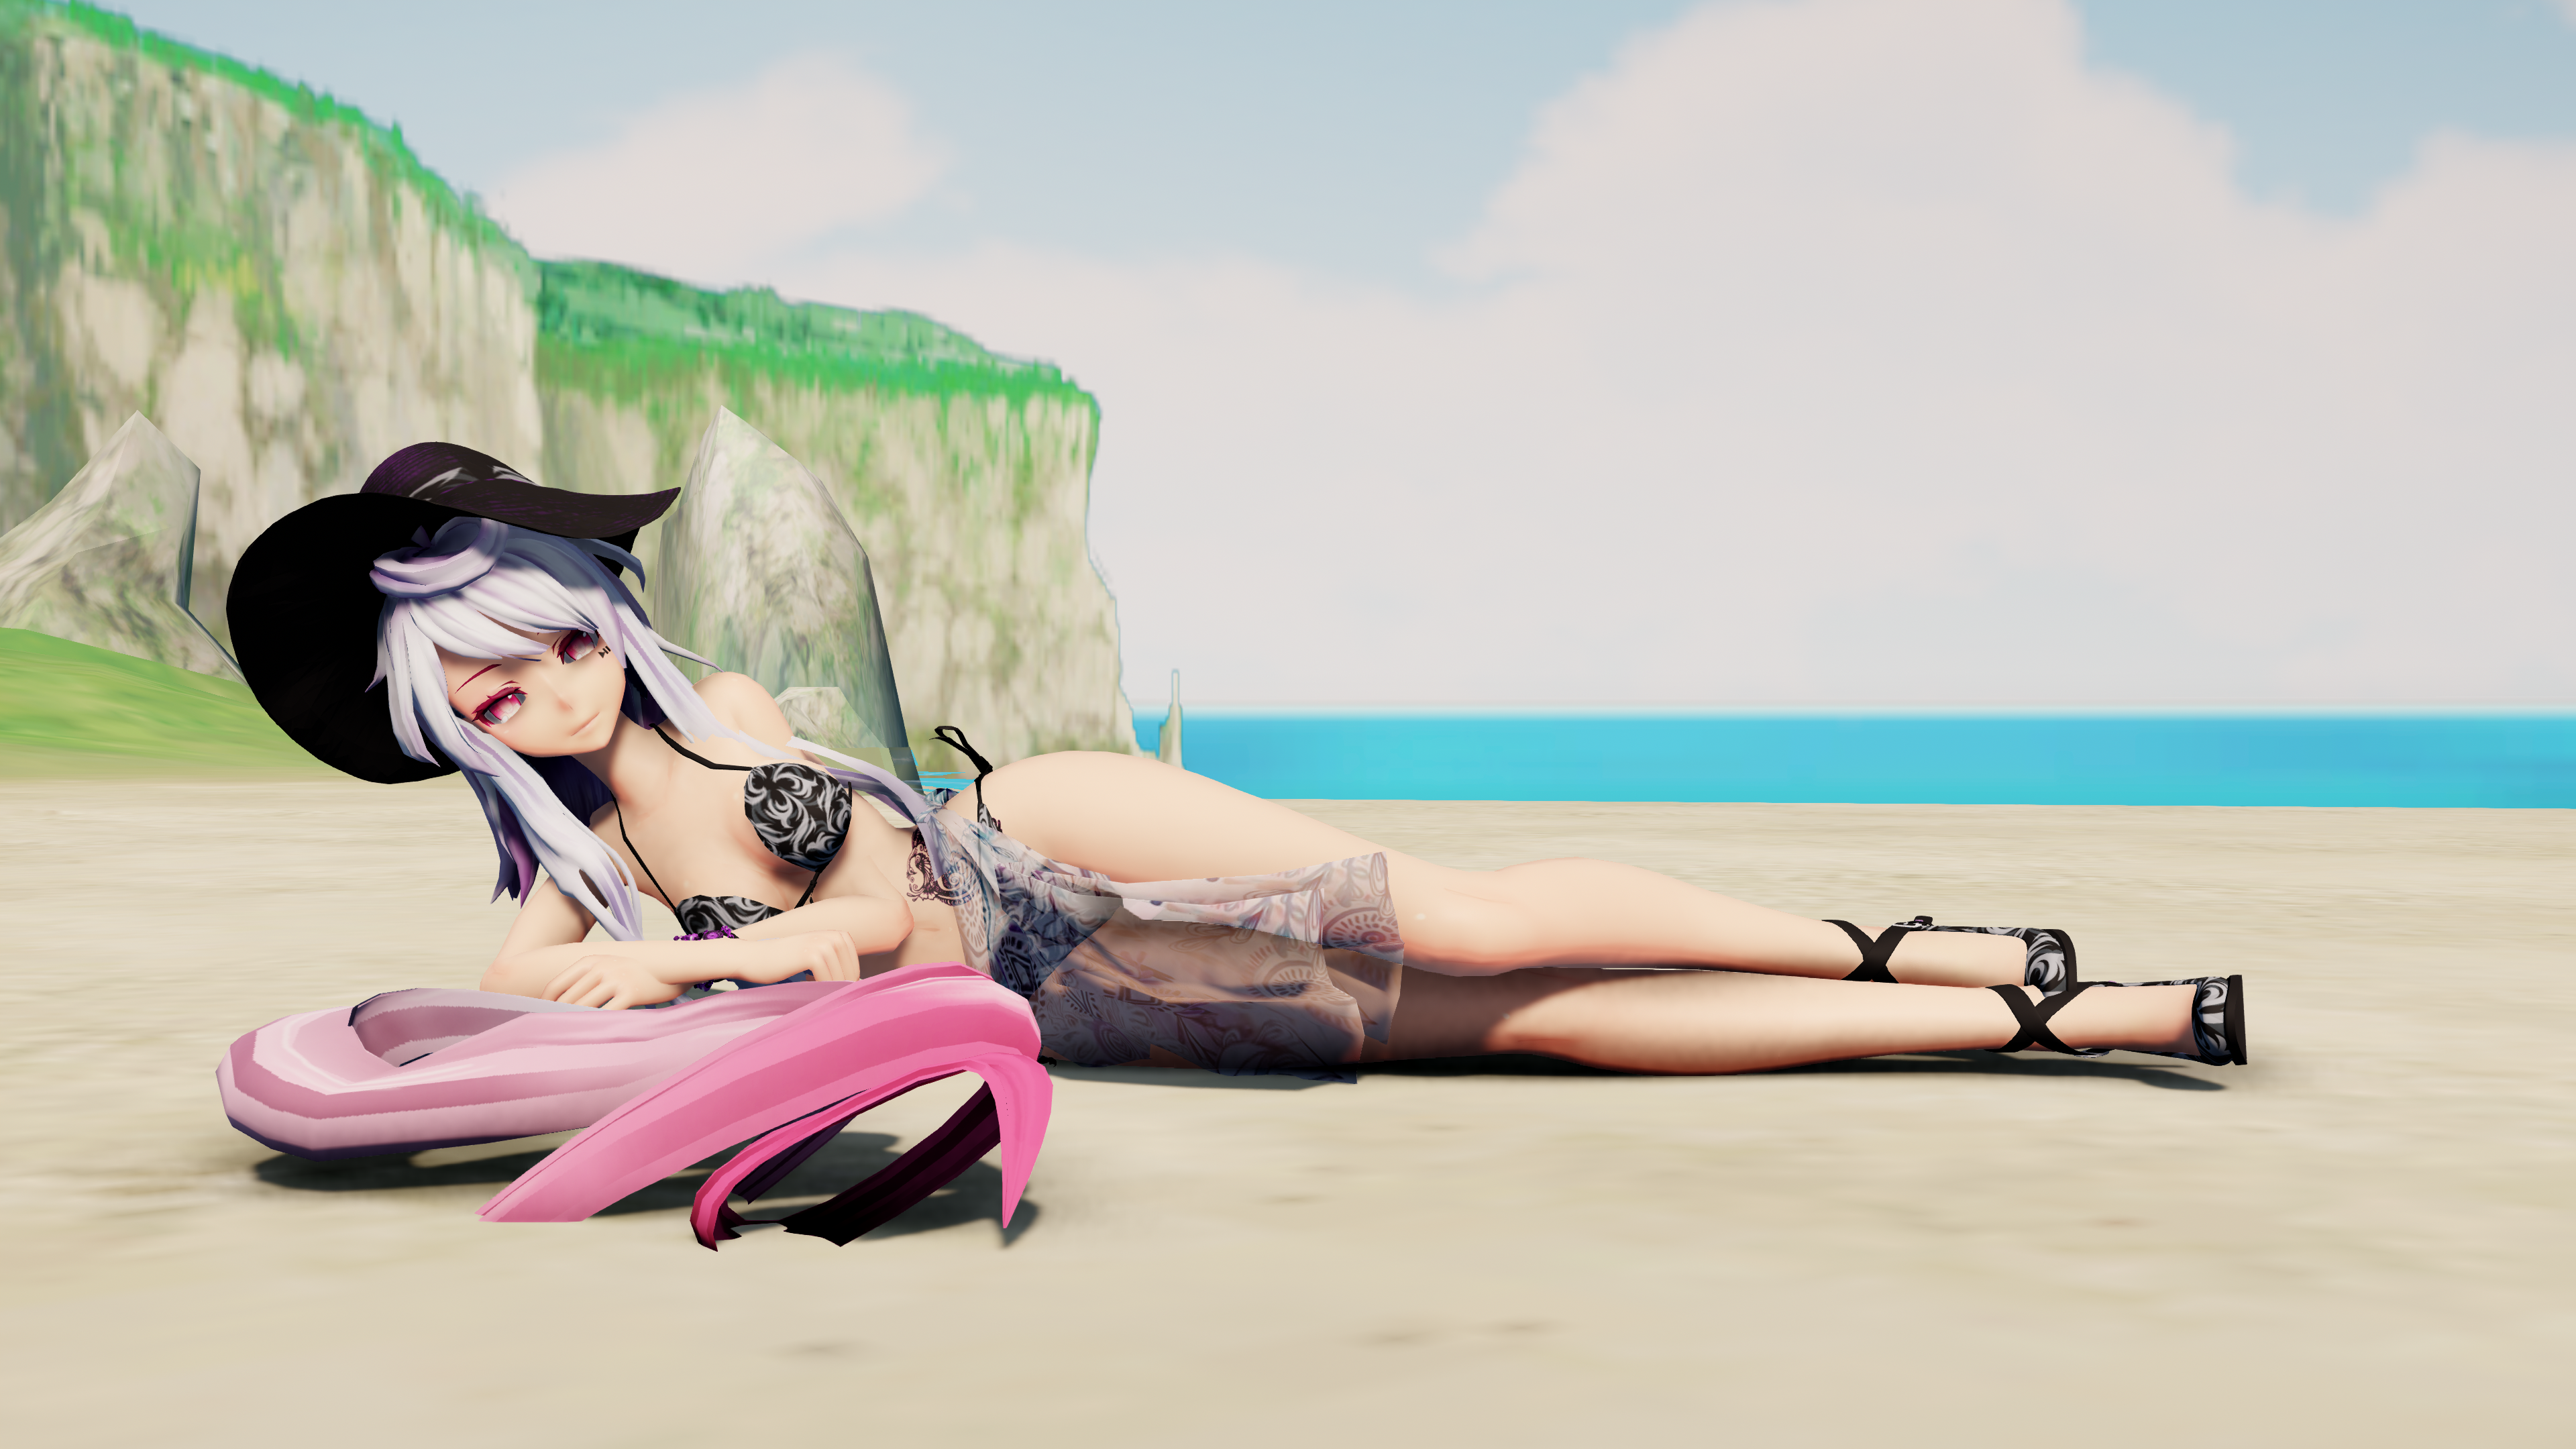 MMD Picture: A Day At The Beach by K-Manoc1 on DeviantArt